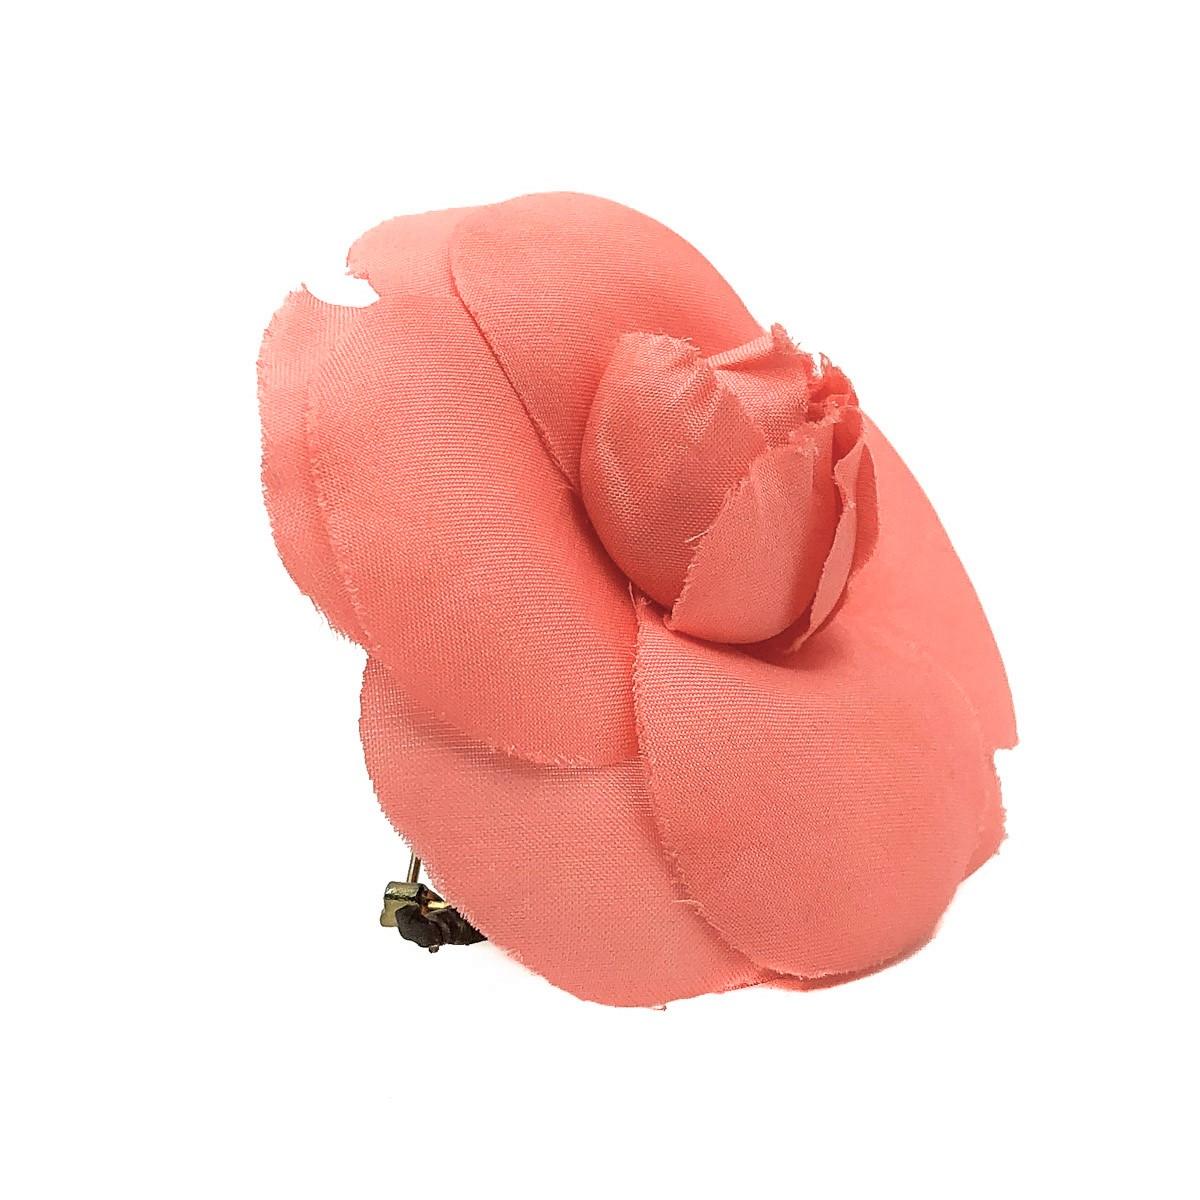 A salmon pink Vintage Chanel Camellia Corsage. Crafted in silk with a pin back. In very good vintage condition, signed, approx. 6.8cms. This is a delicate floral piece from the House of Chanel and would require careful wear and storage to preserve